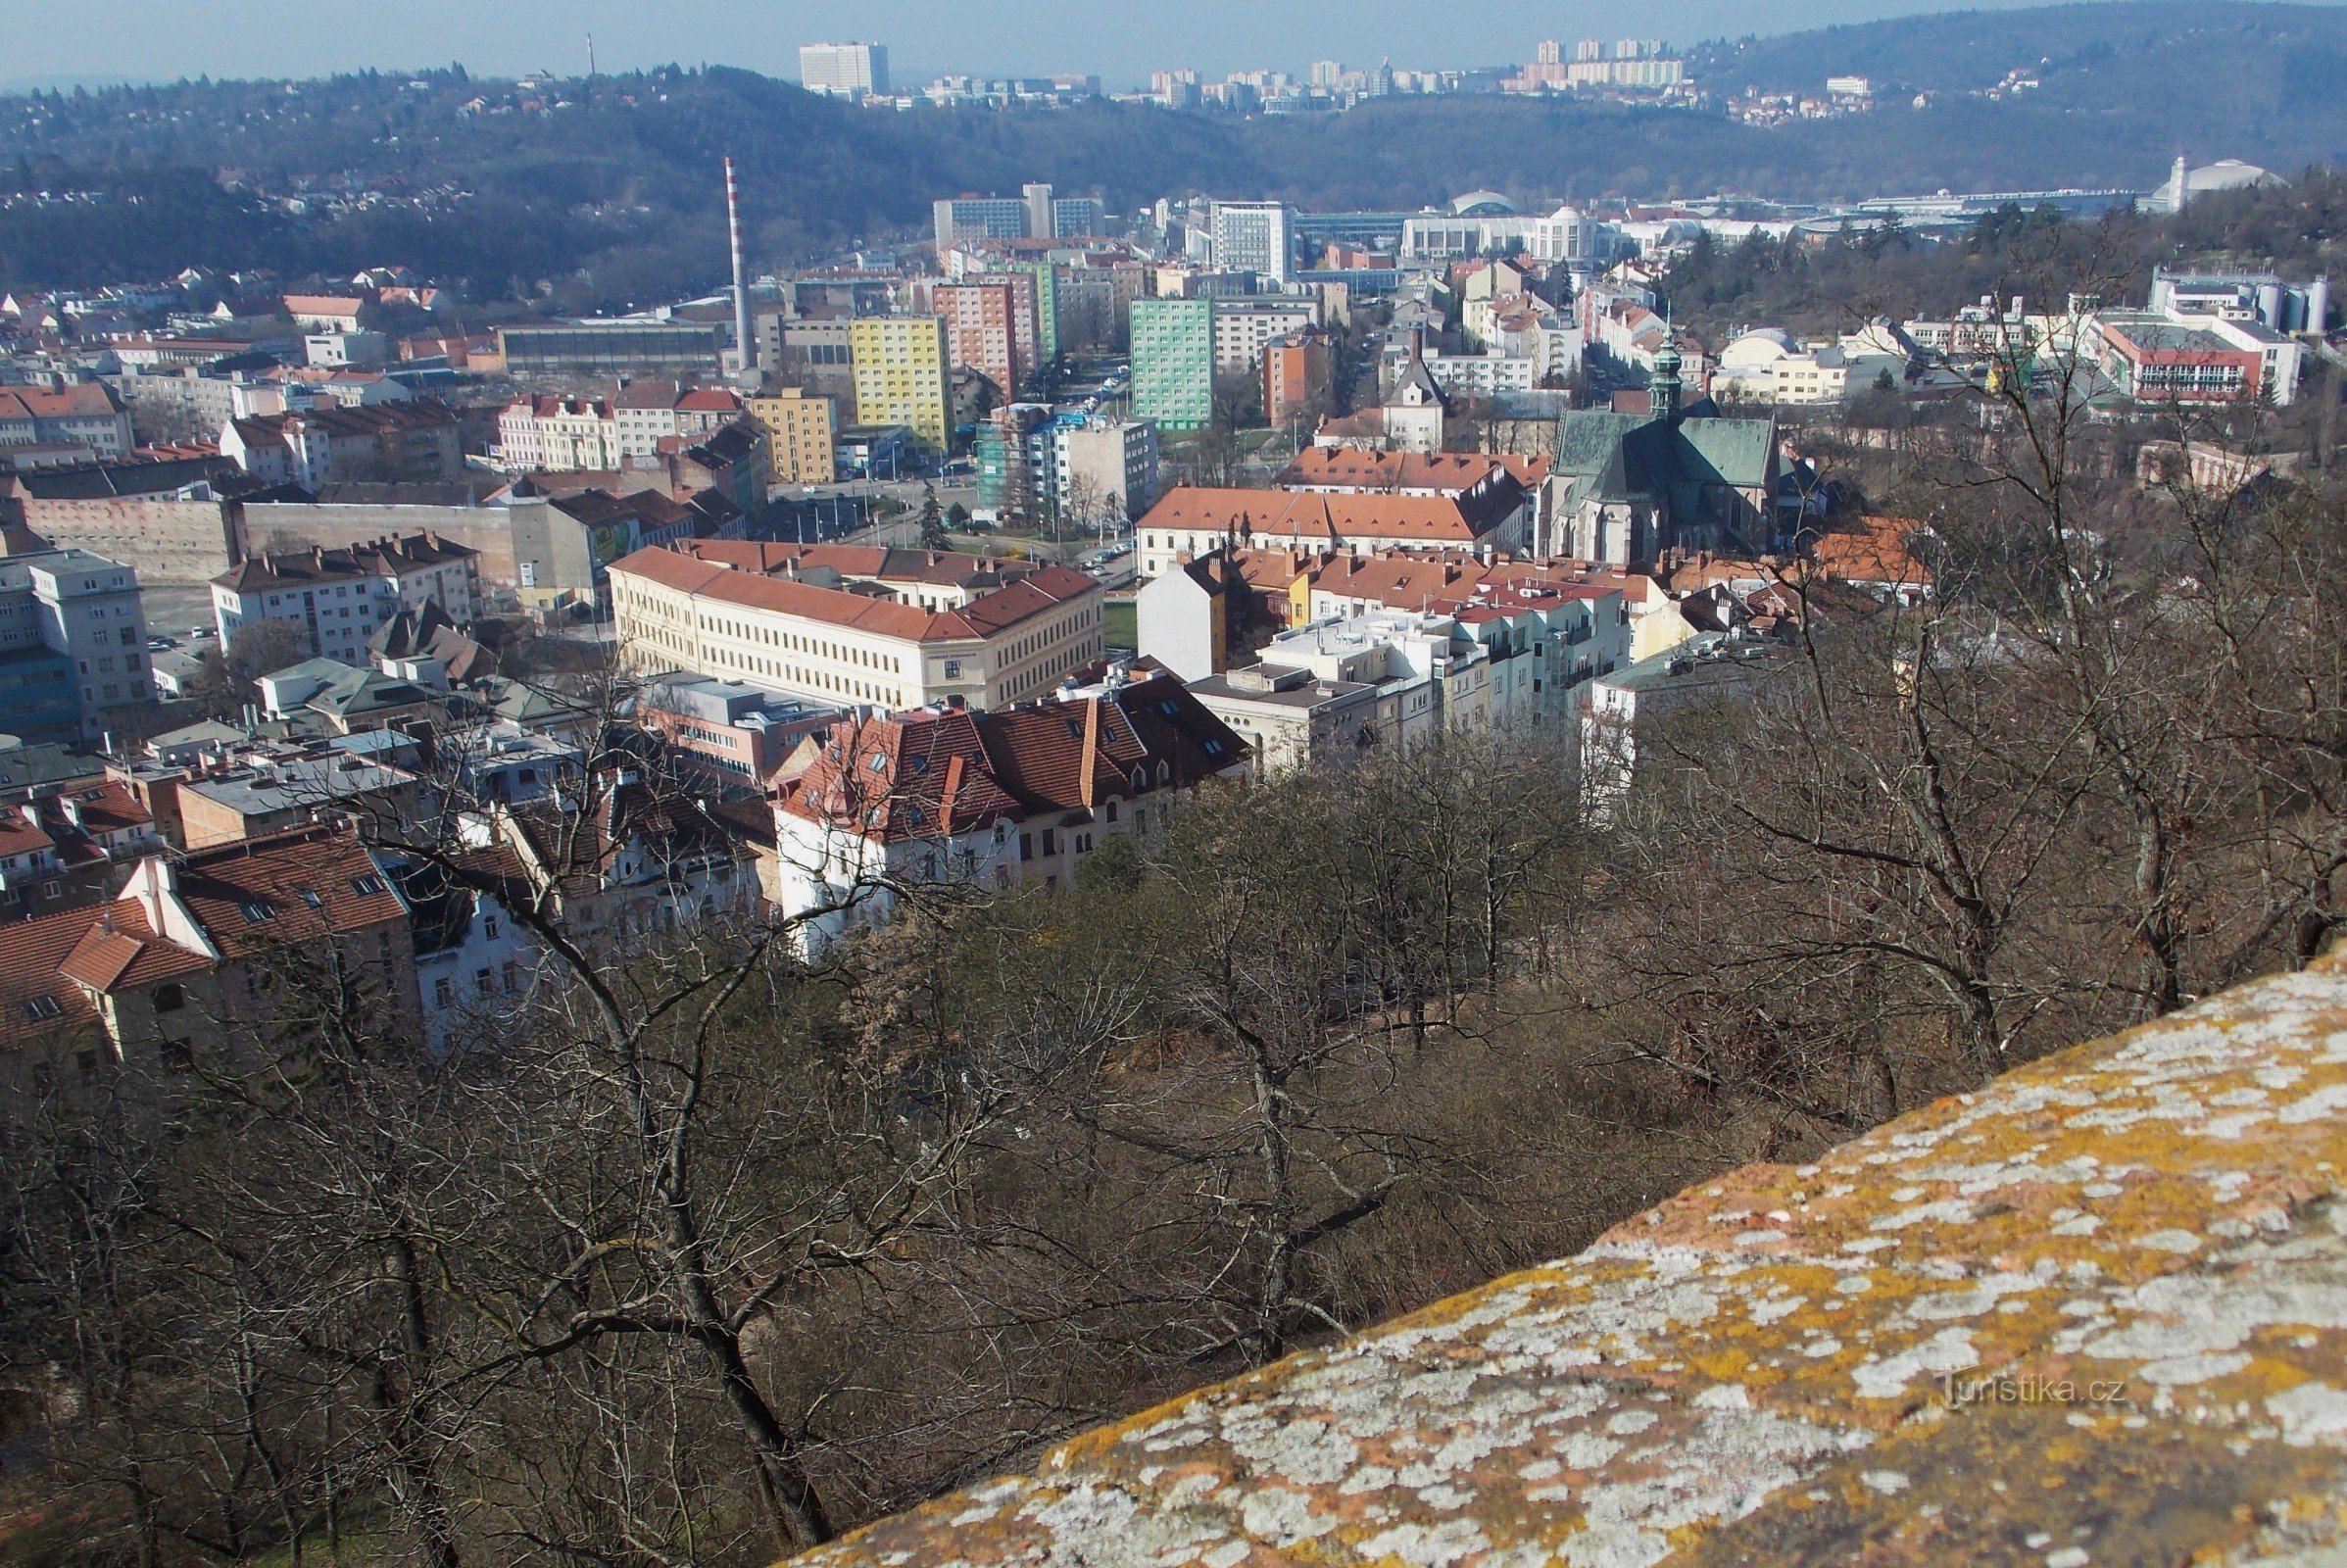 Brno - the city under the sign of the dragon